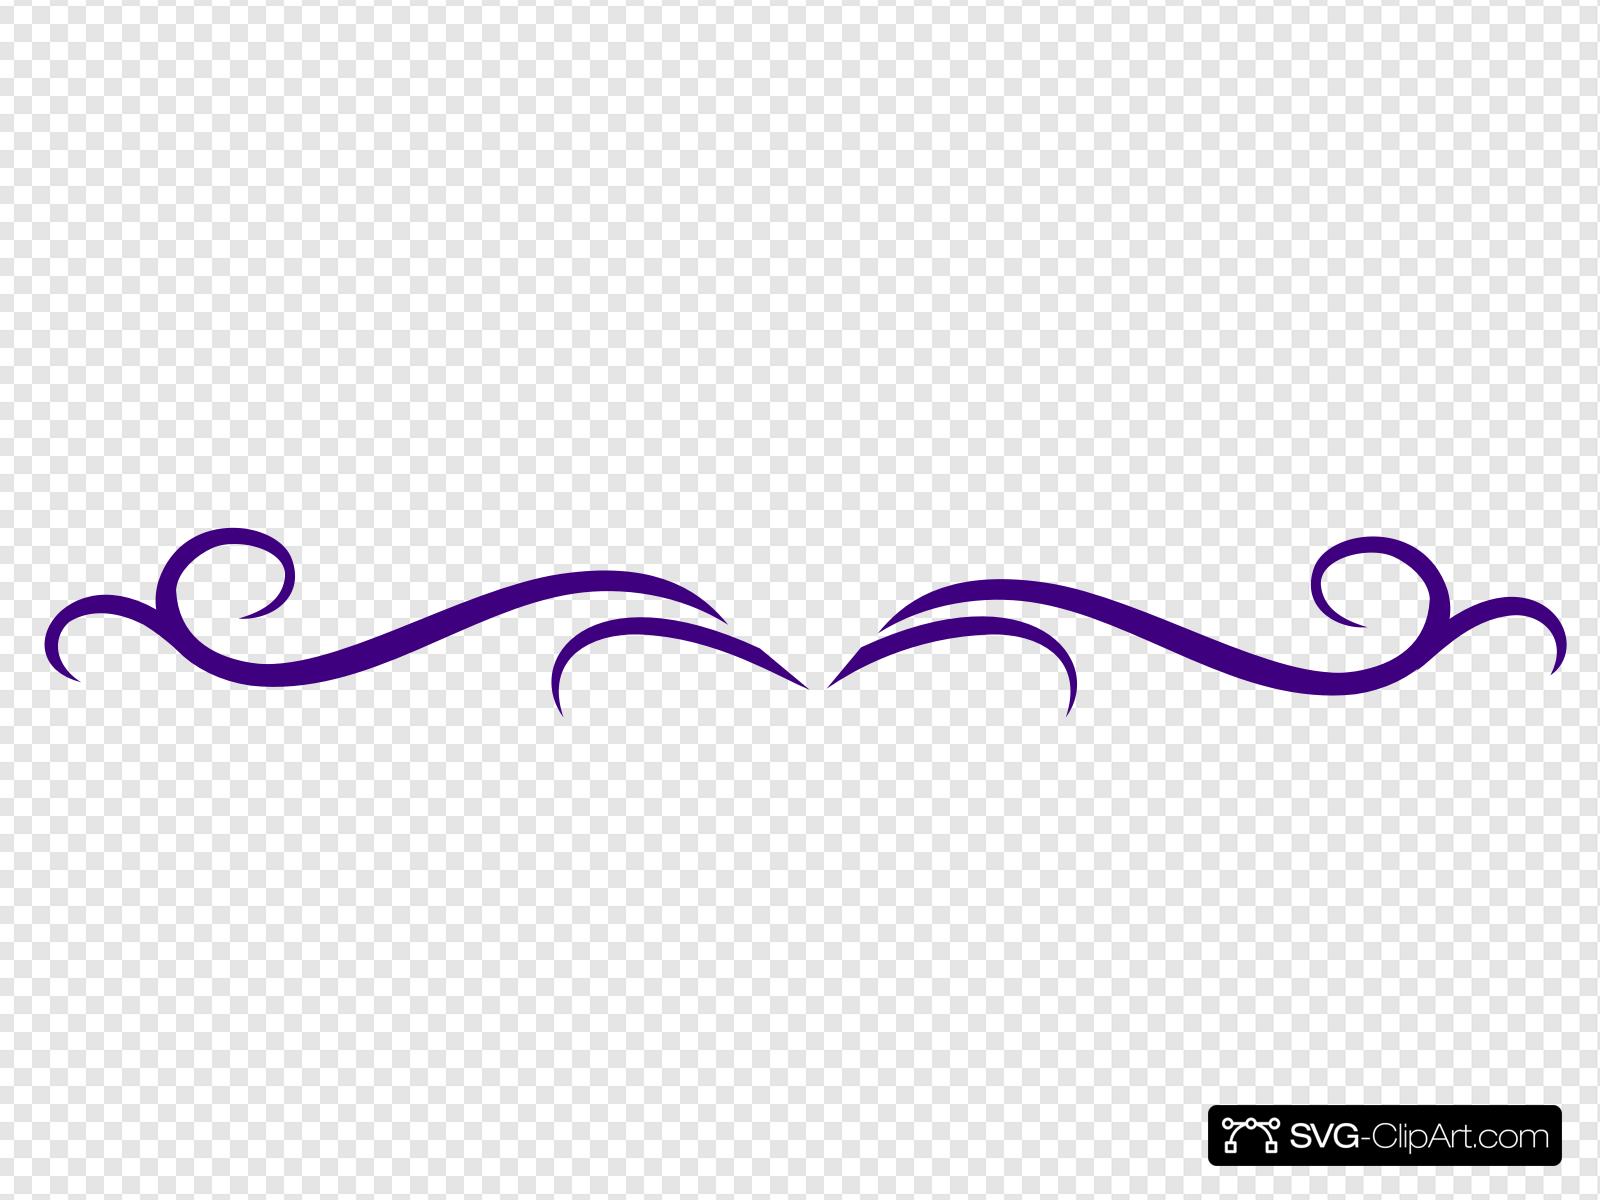 Scroll clipart svg, Scroll svg Transparent FREE for